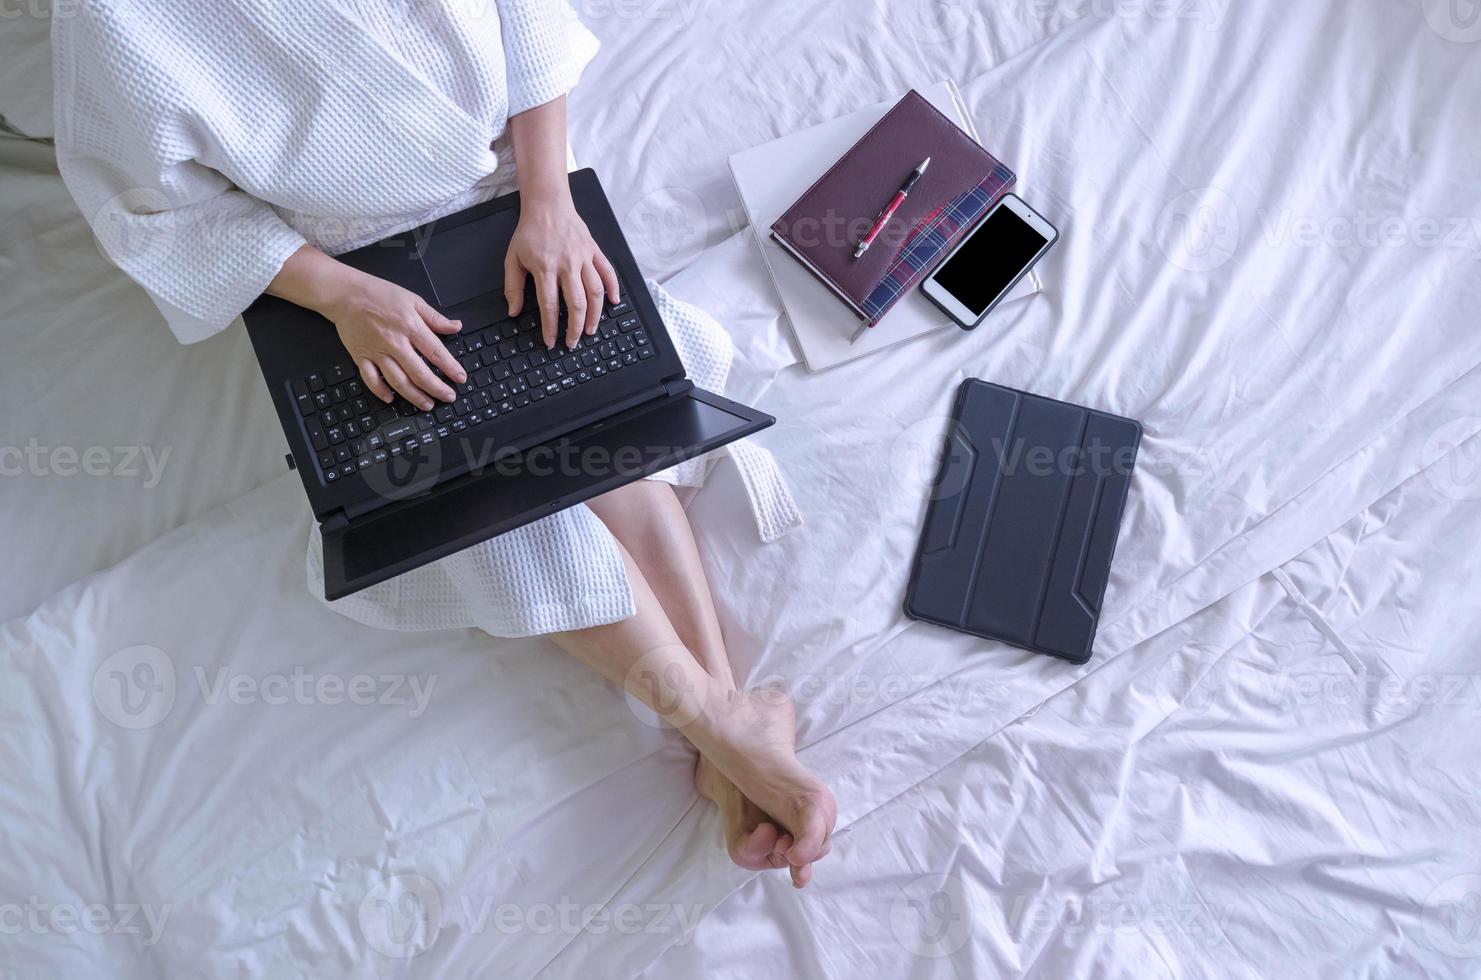 Top view of woman in white bathrobe using laptop computer with book and various device on bed in her bedroom photo